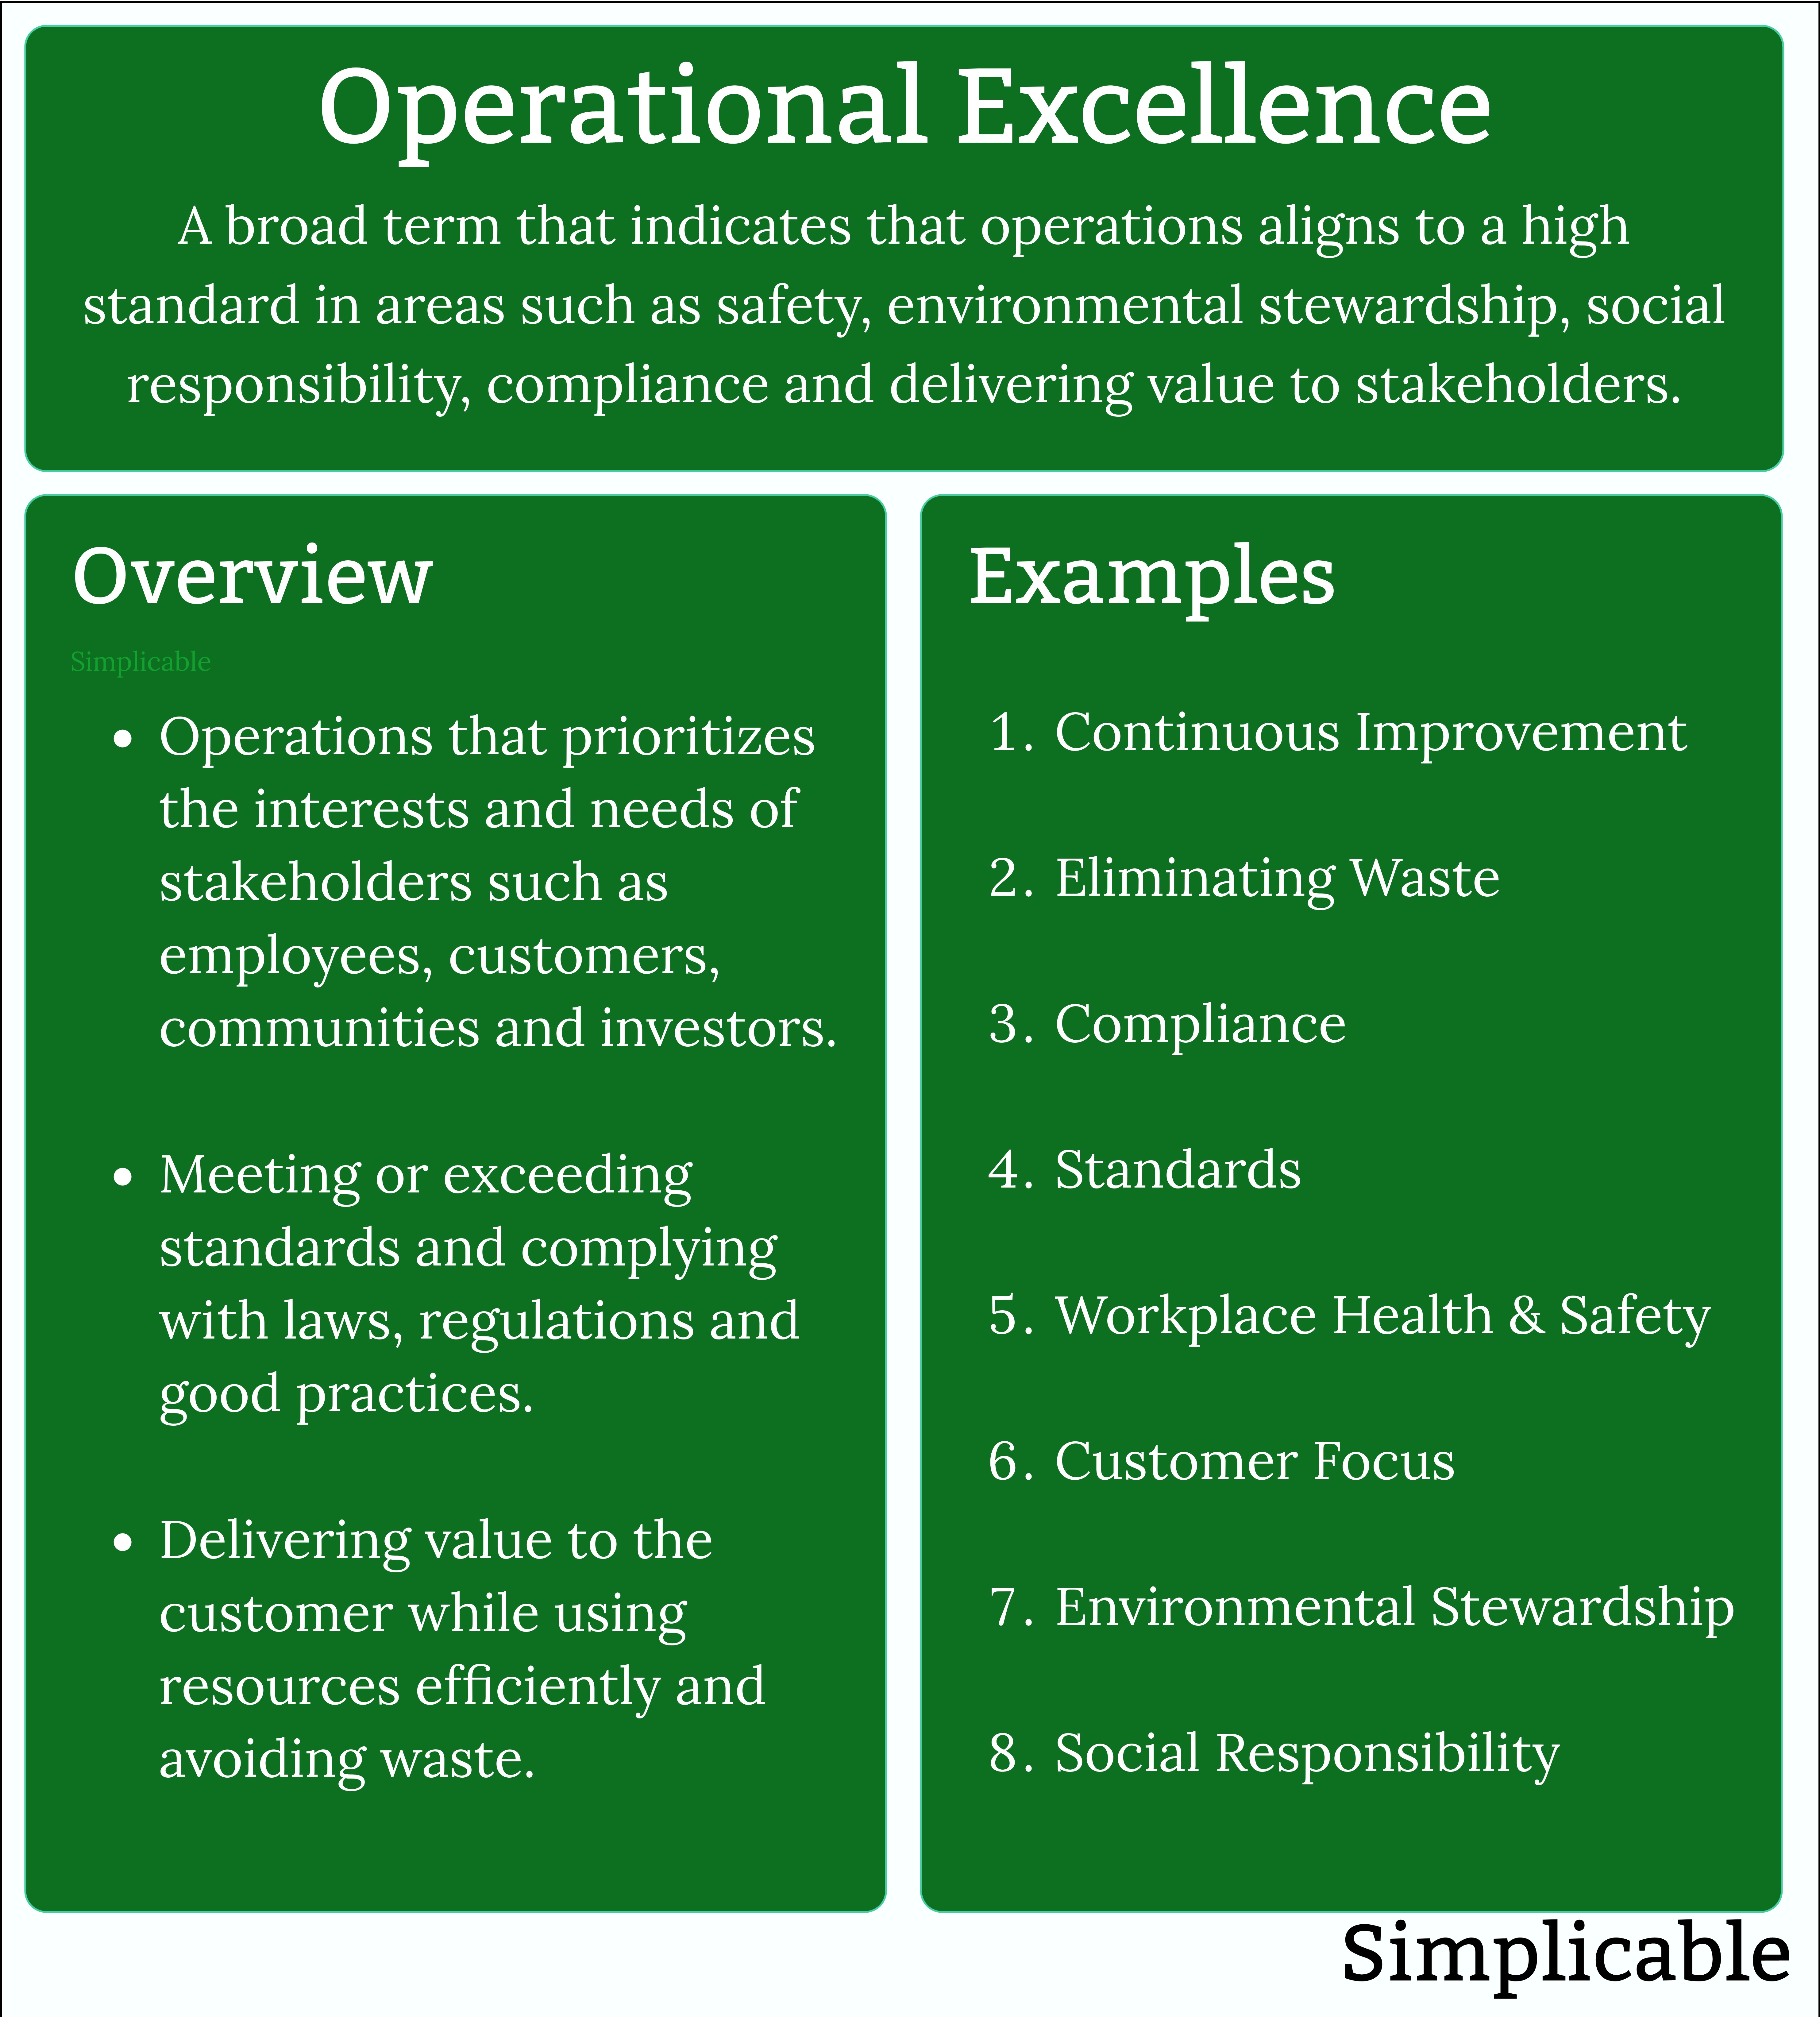 operational excellence summary and examples